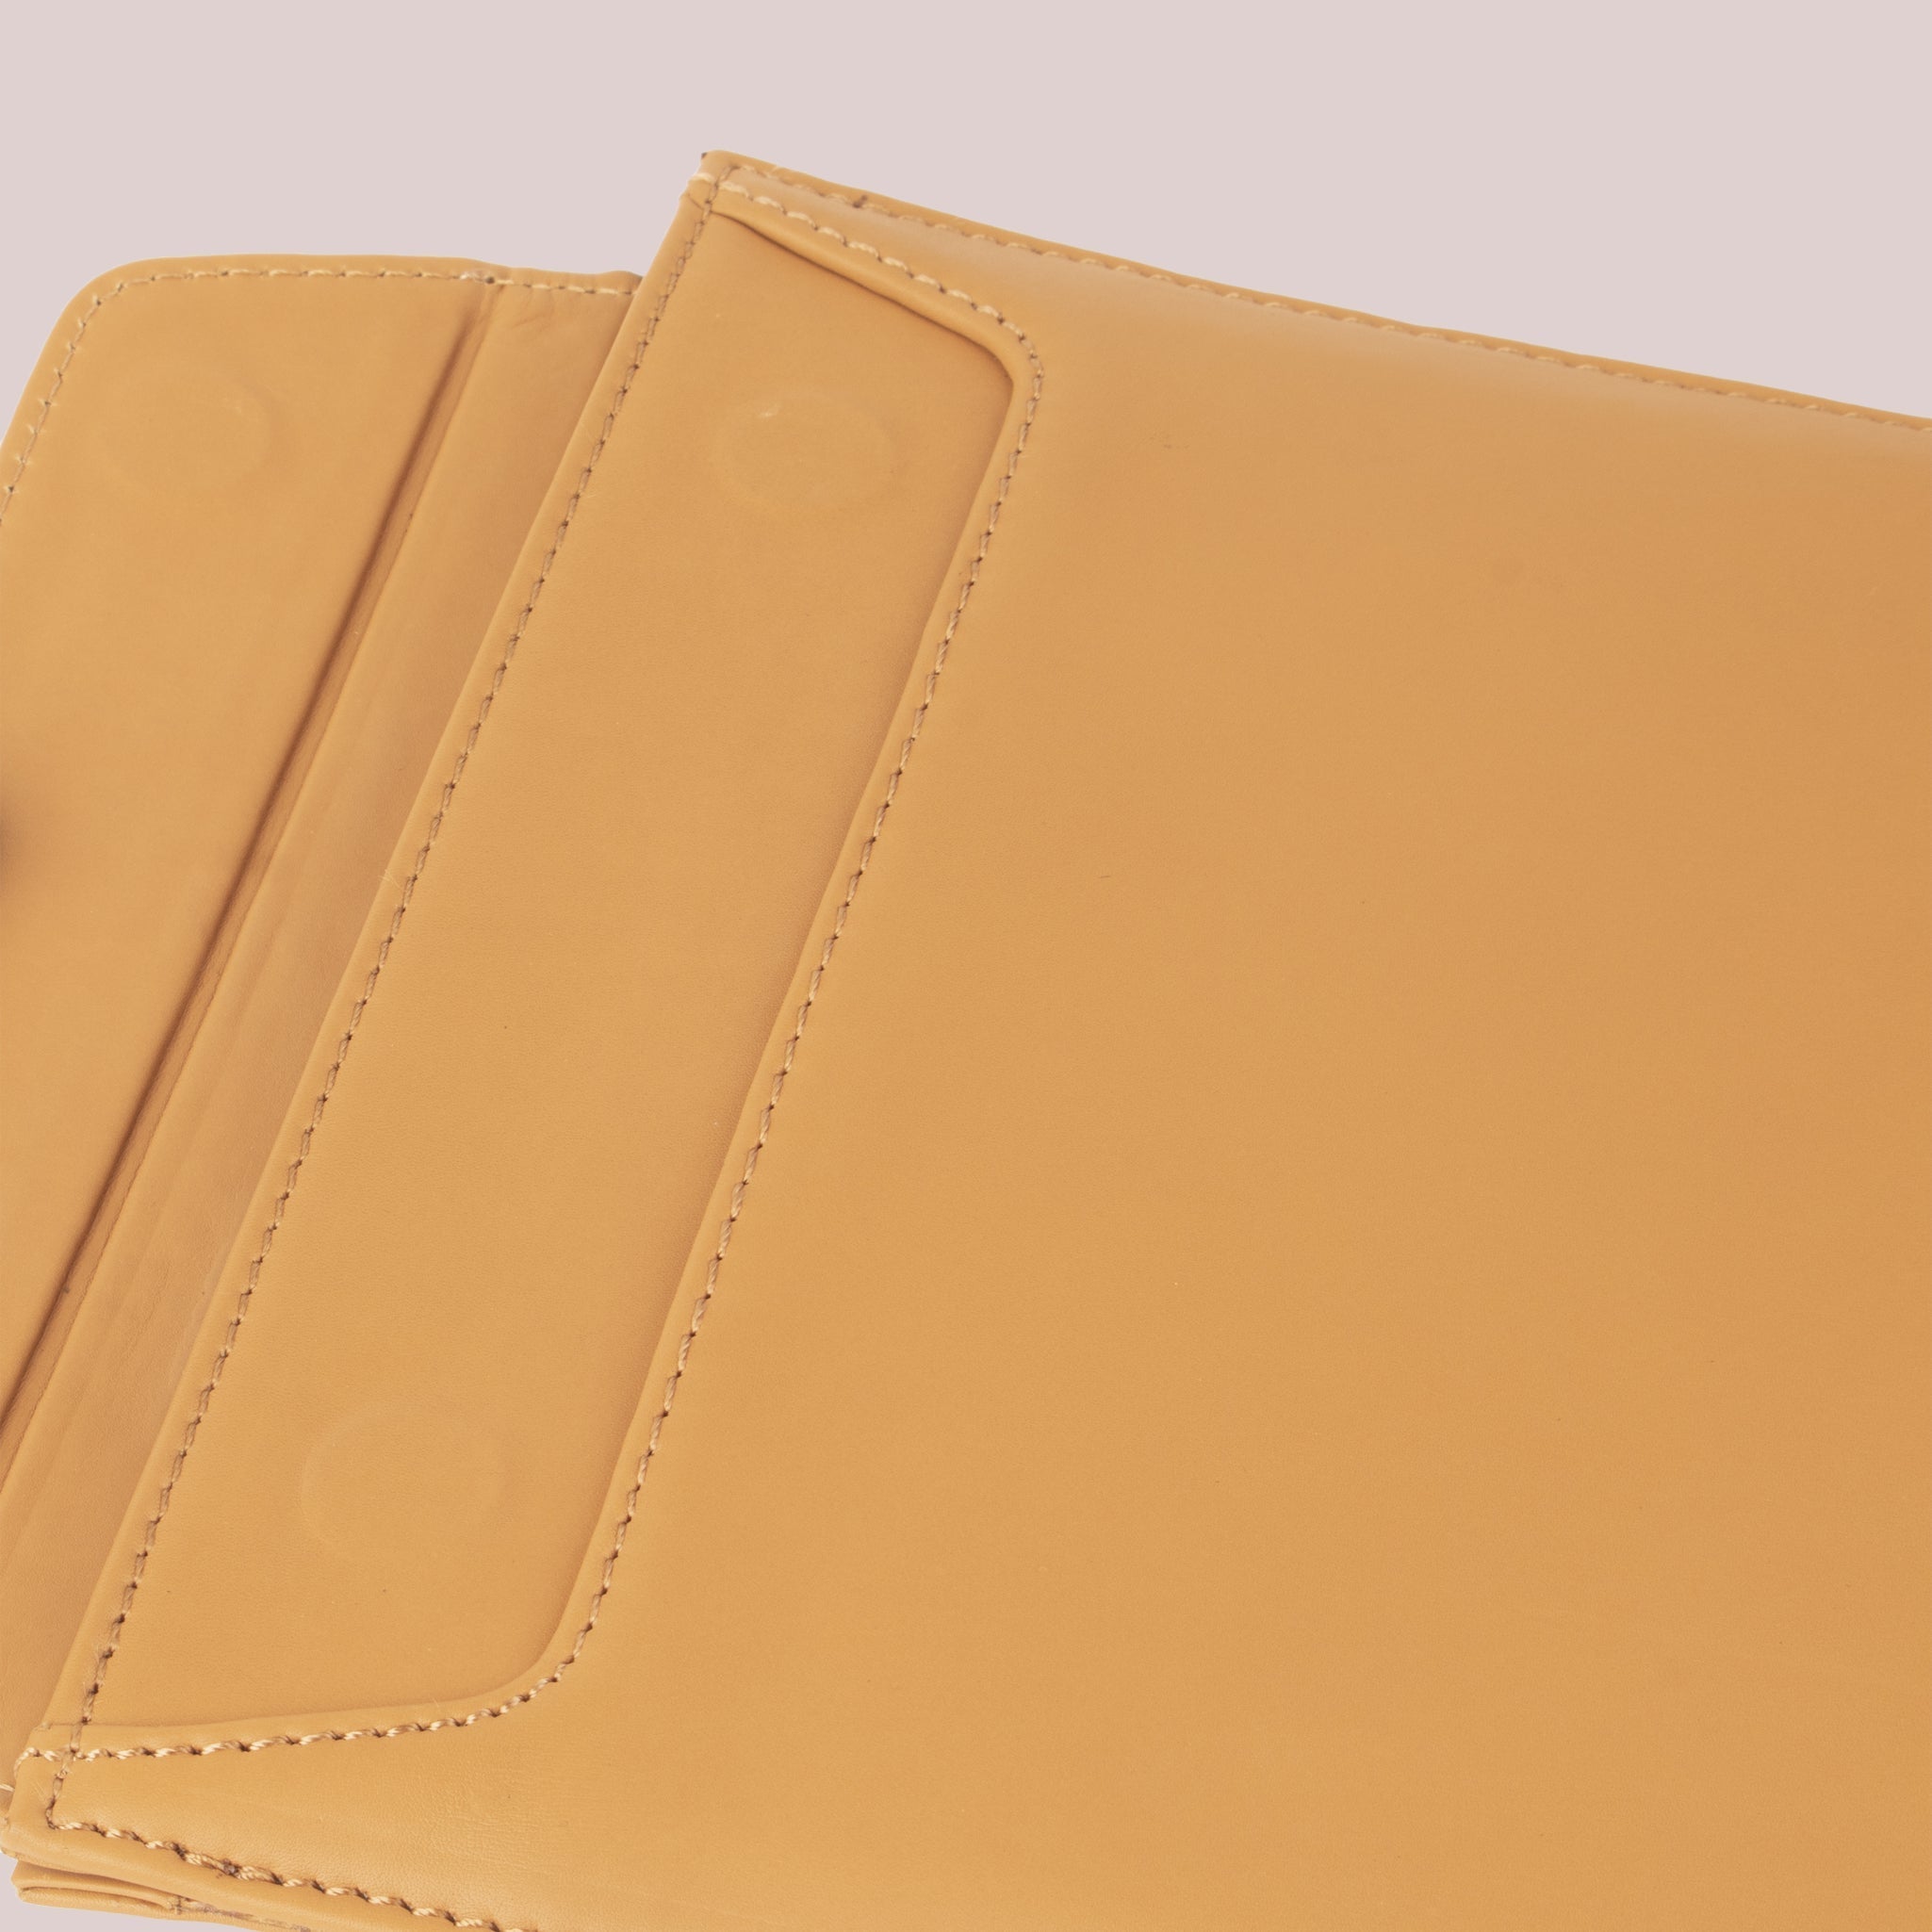 Purchase online Macbook leather sleeve in a stylish yellow color